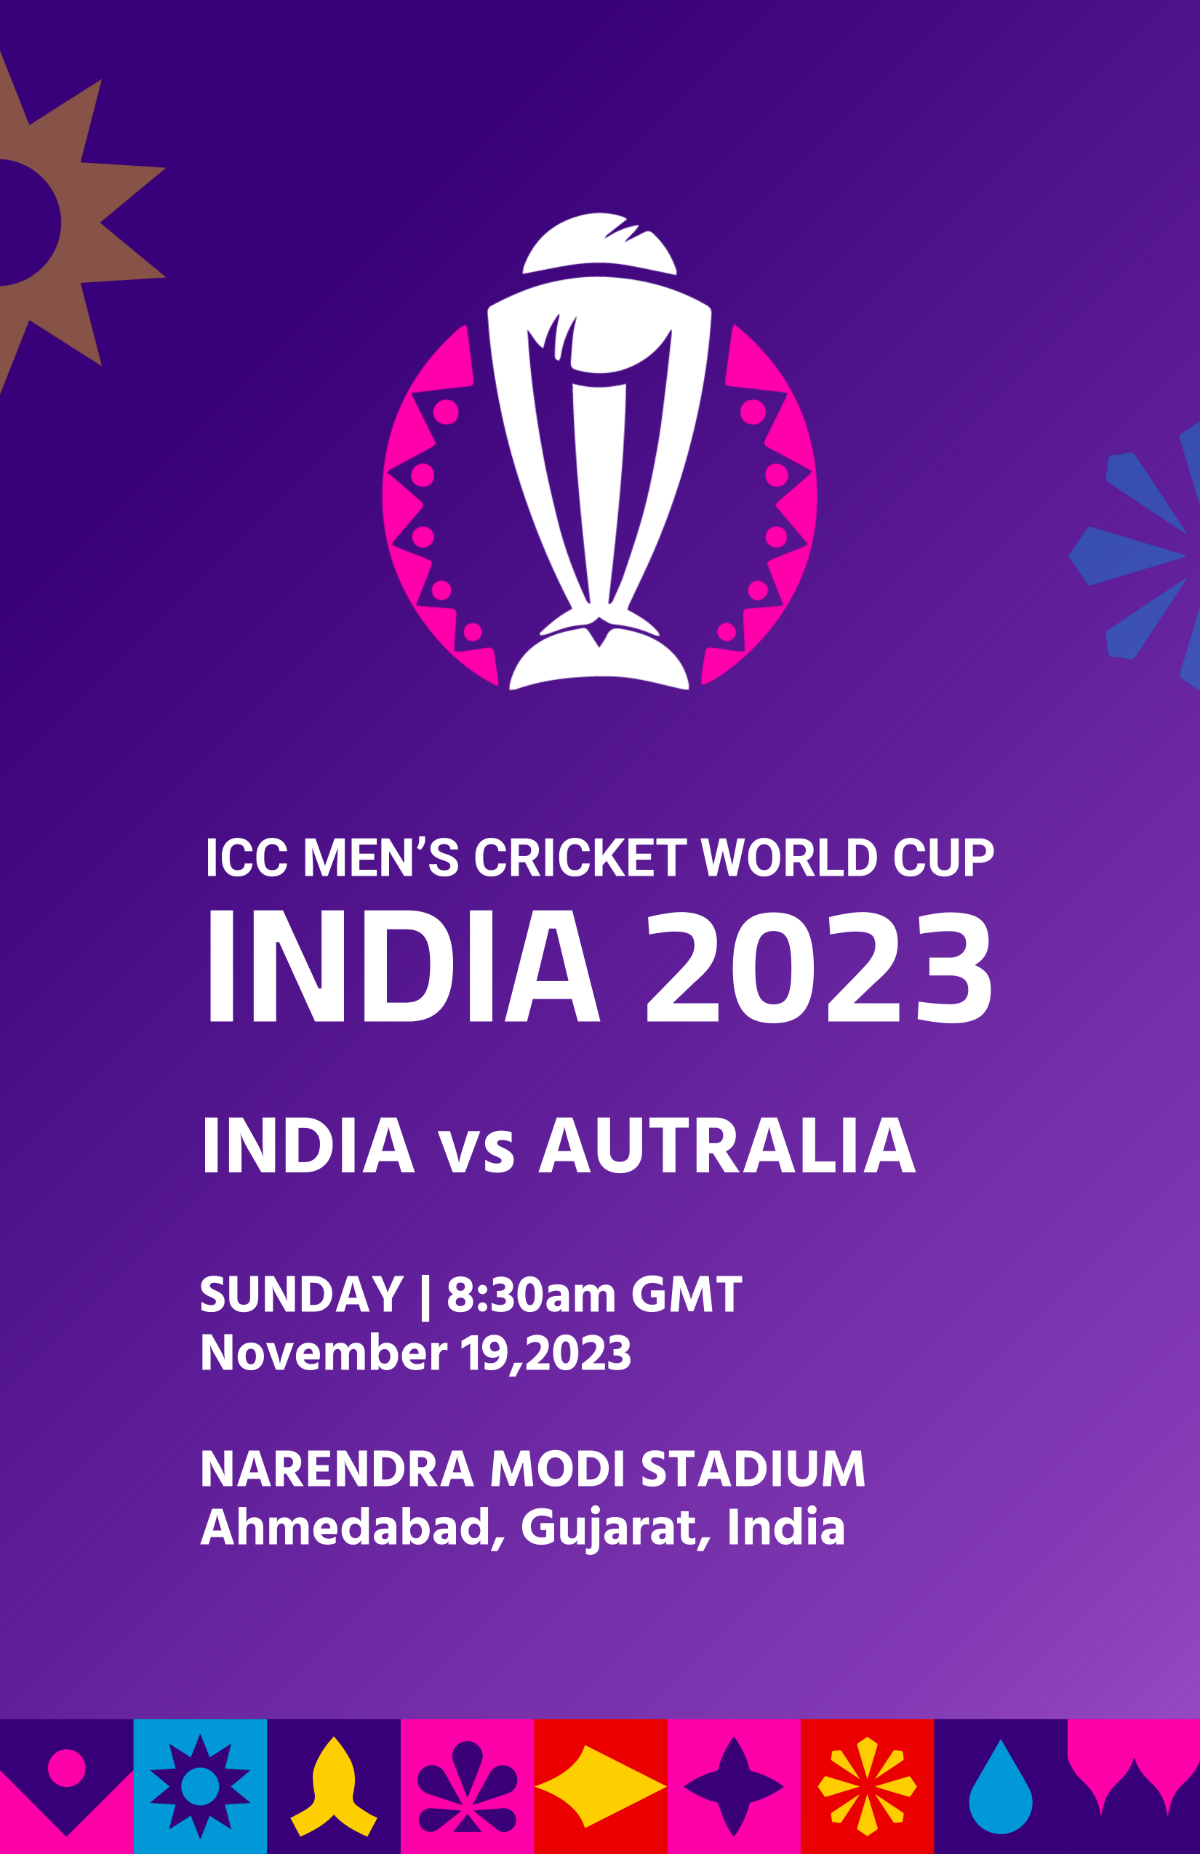 Free 2023 ICC Men's Cricket World Cup Schedule Poster Template